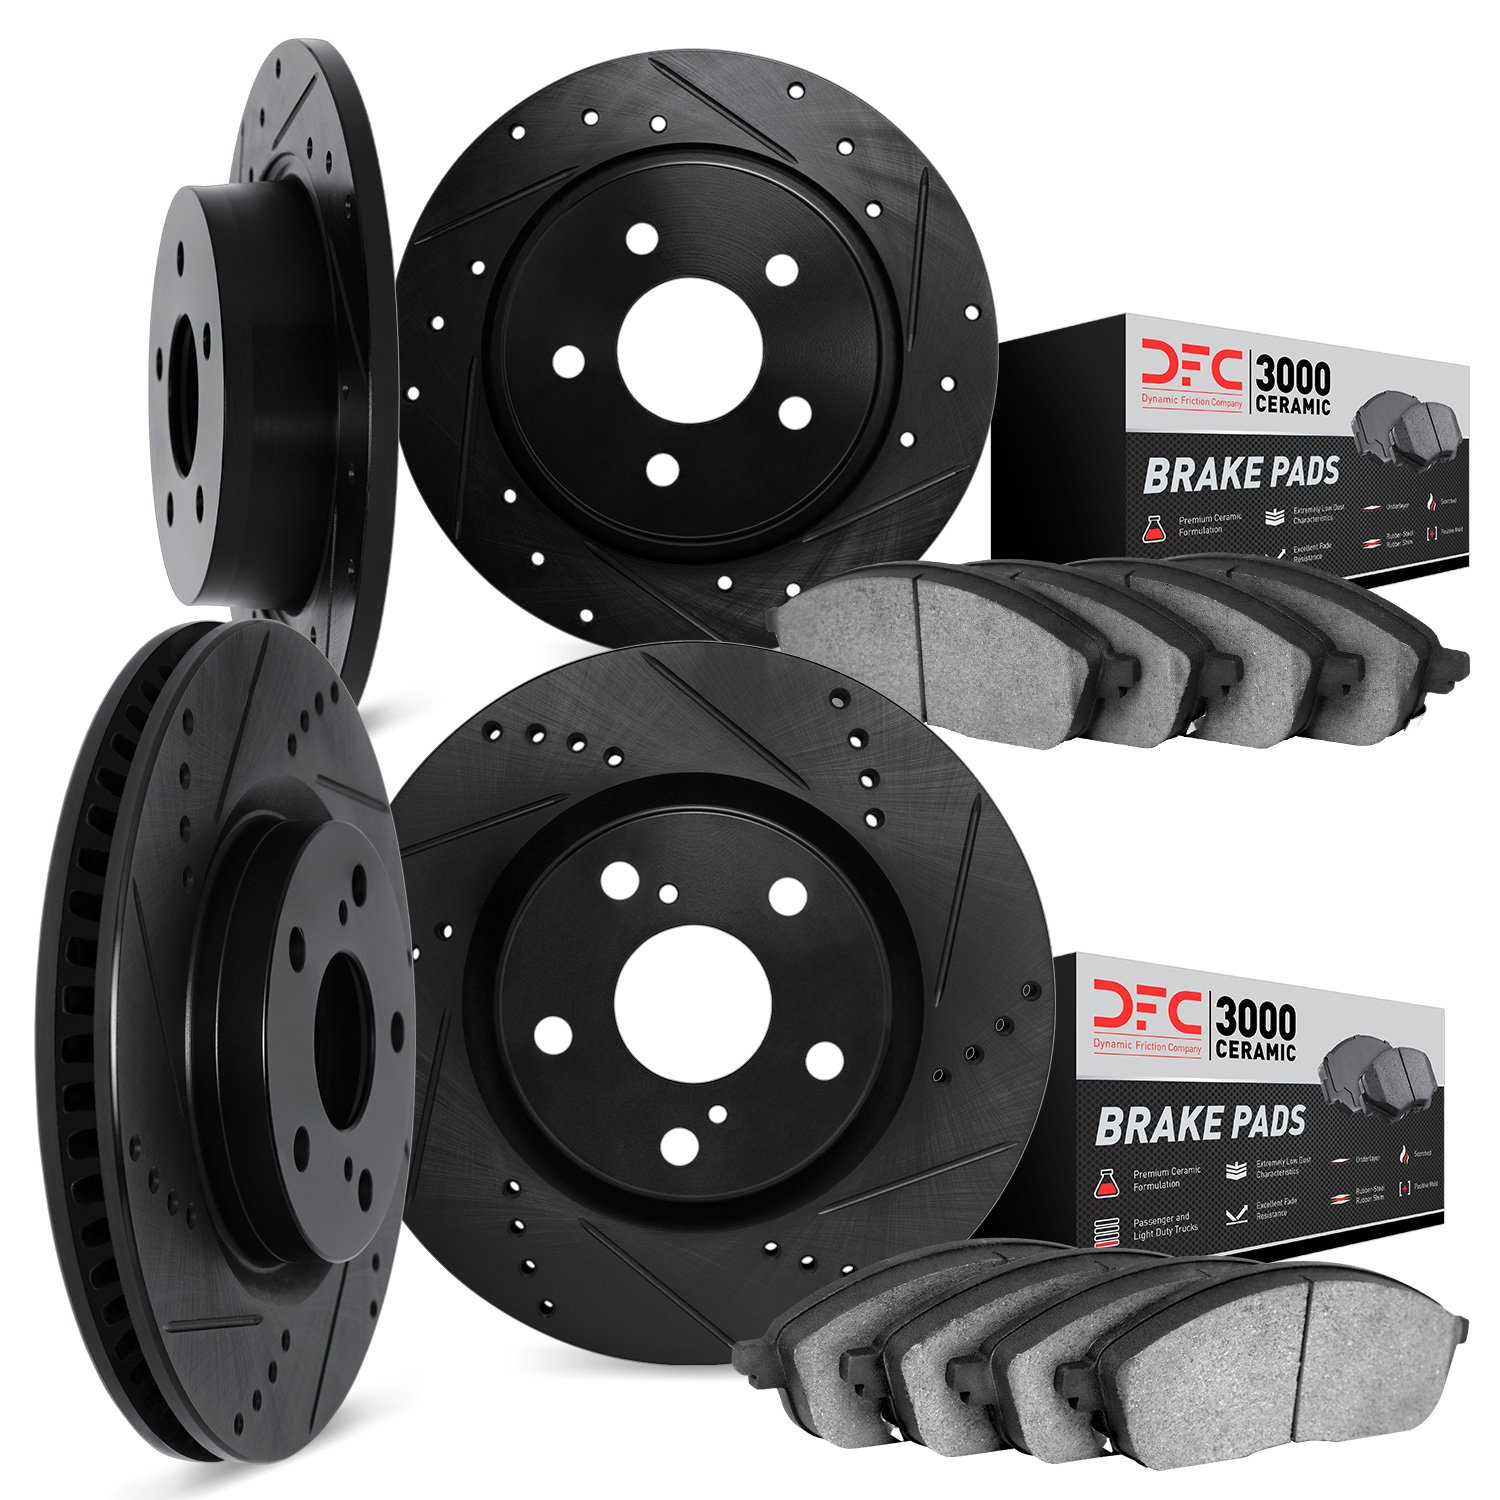 8304-13024 Drilled/Slotted Brake Rotors with 3000-Series Ceramic Brake Pads Kit [Black], 2005-2005 Subaru, Position: Front and R